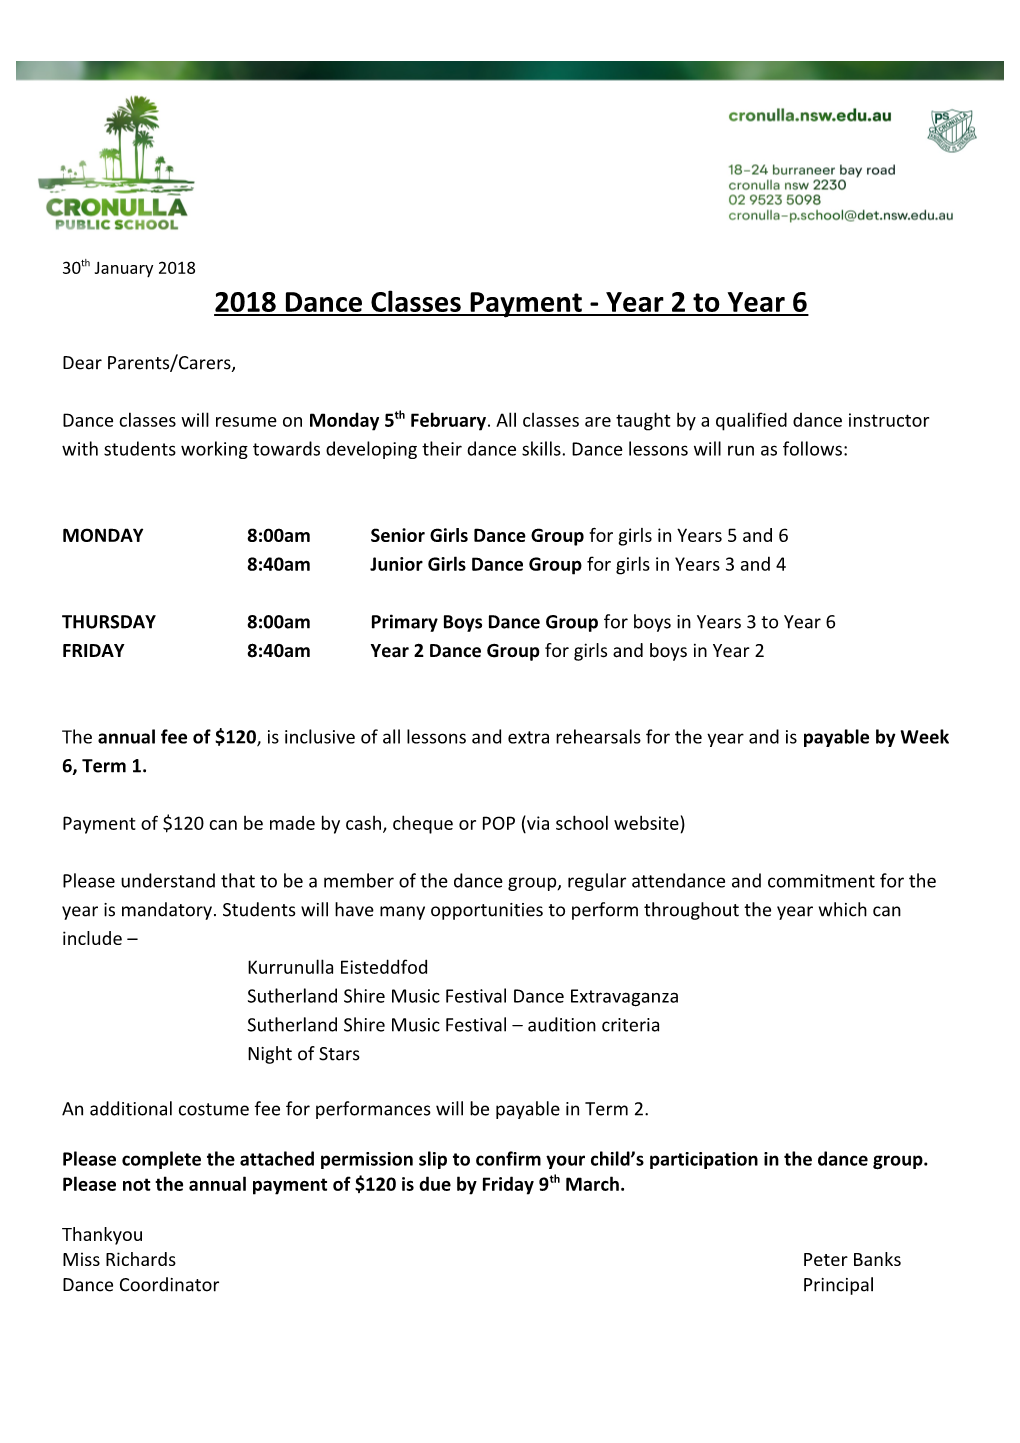 2018 Dance Classes Payment - Year 2 to Year 6